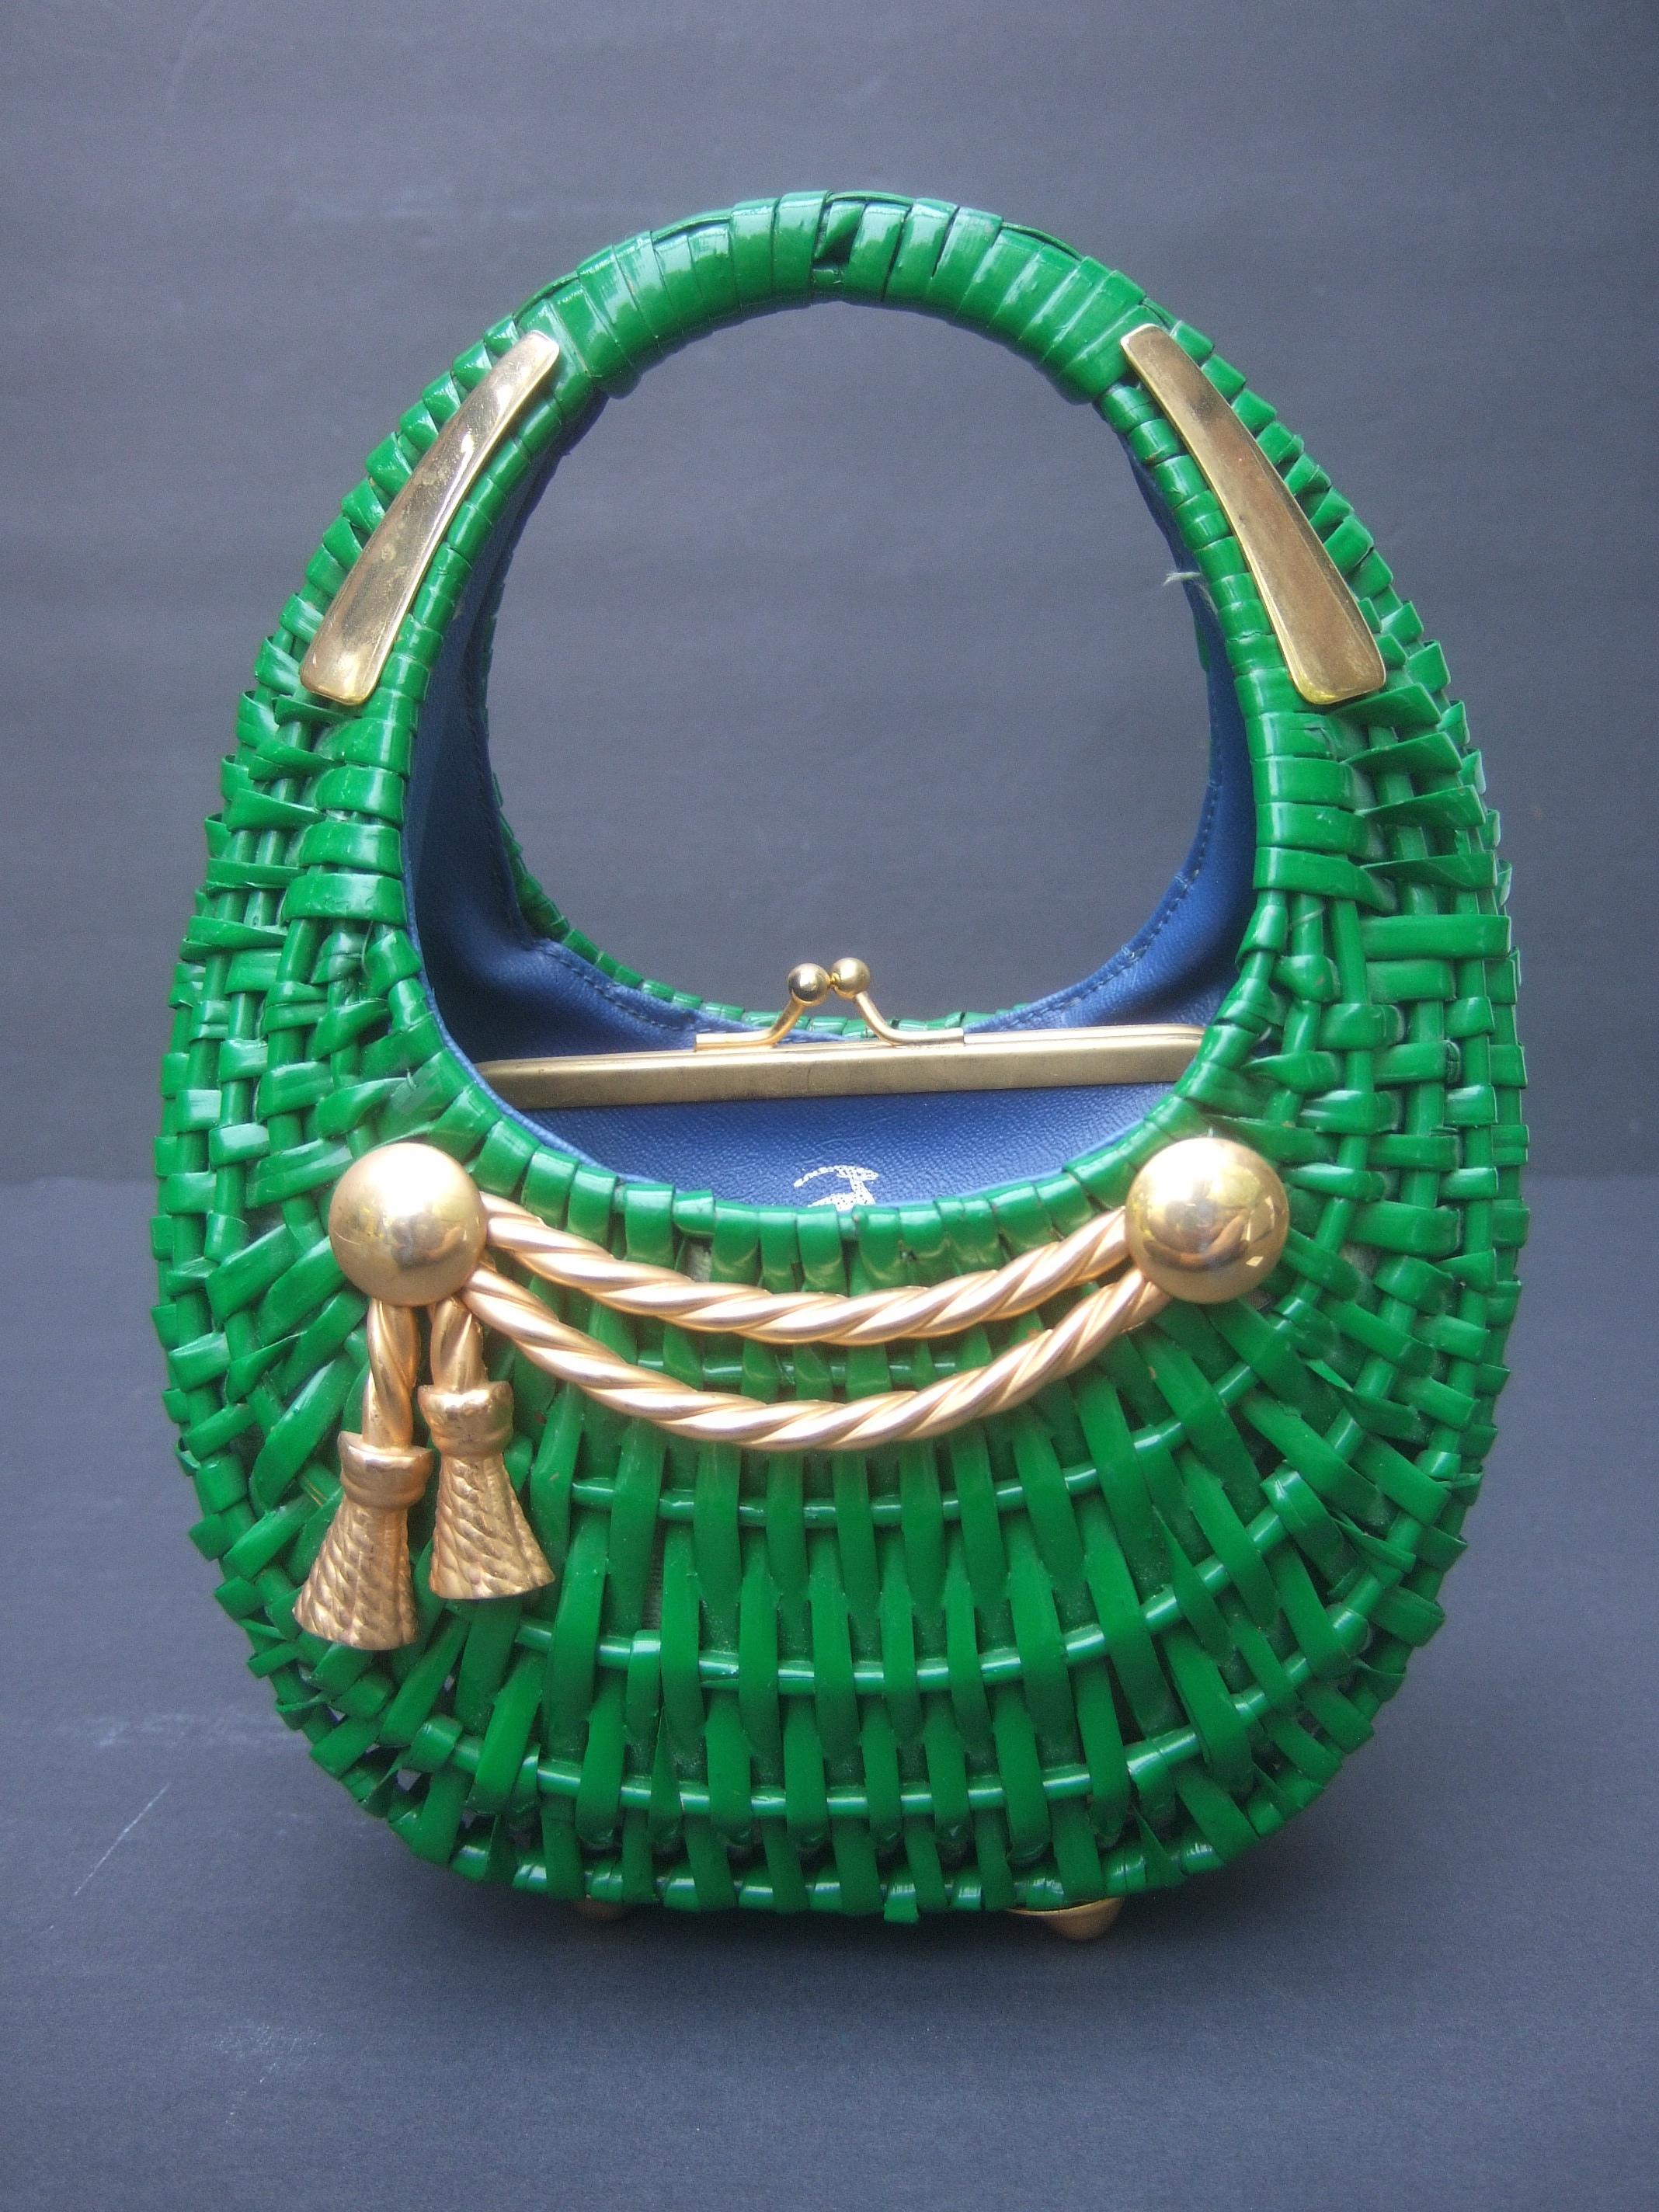 1970s Italian kelly green wicker diminutive size basket-shaped handbag designed by Koret 
The charming compact size wicker handbag is adorned with gilt metal decoration on the front exterior
A braided gold metal rope emblem is mounted on the front.